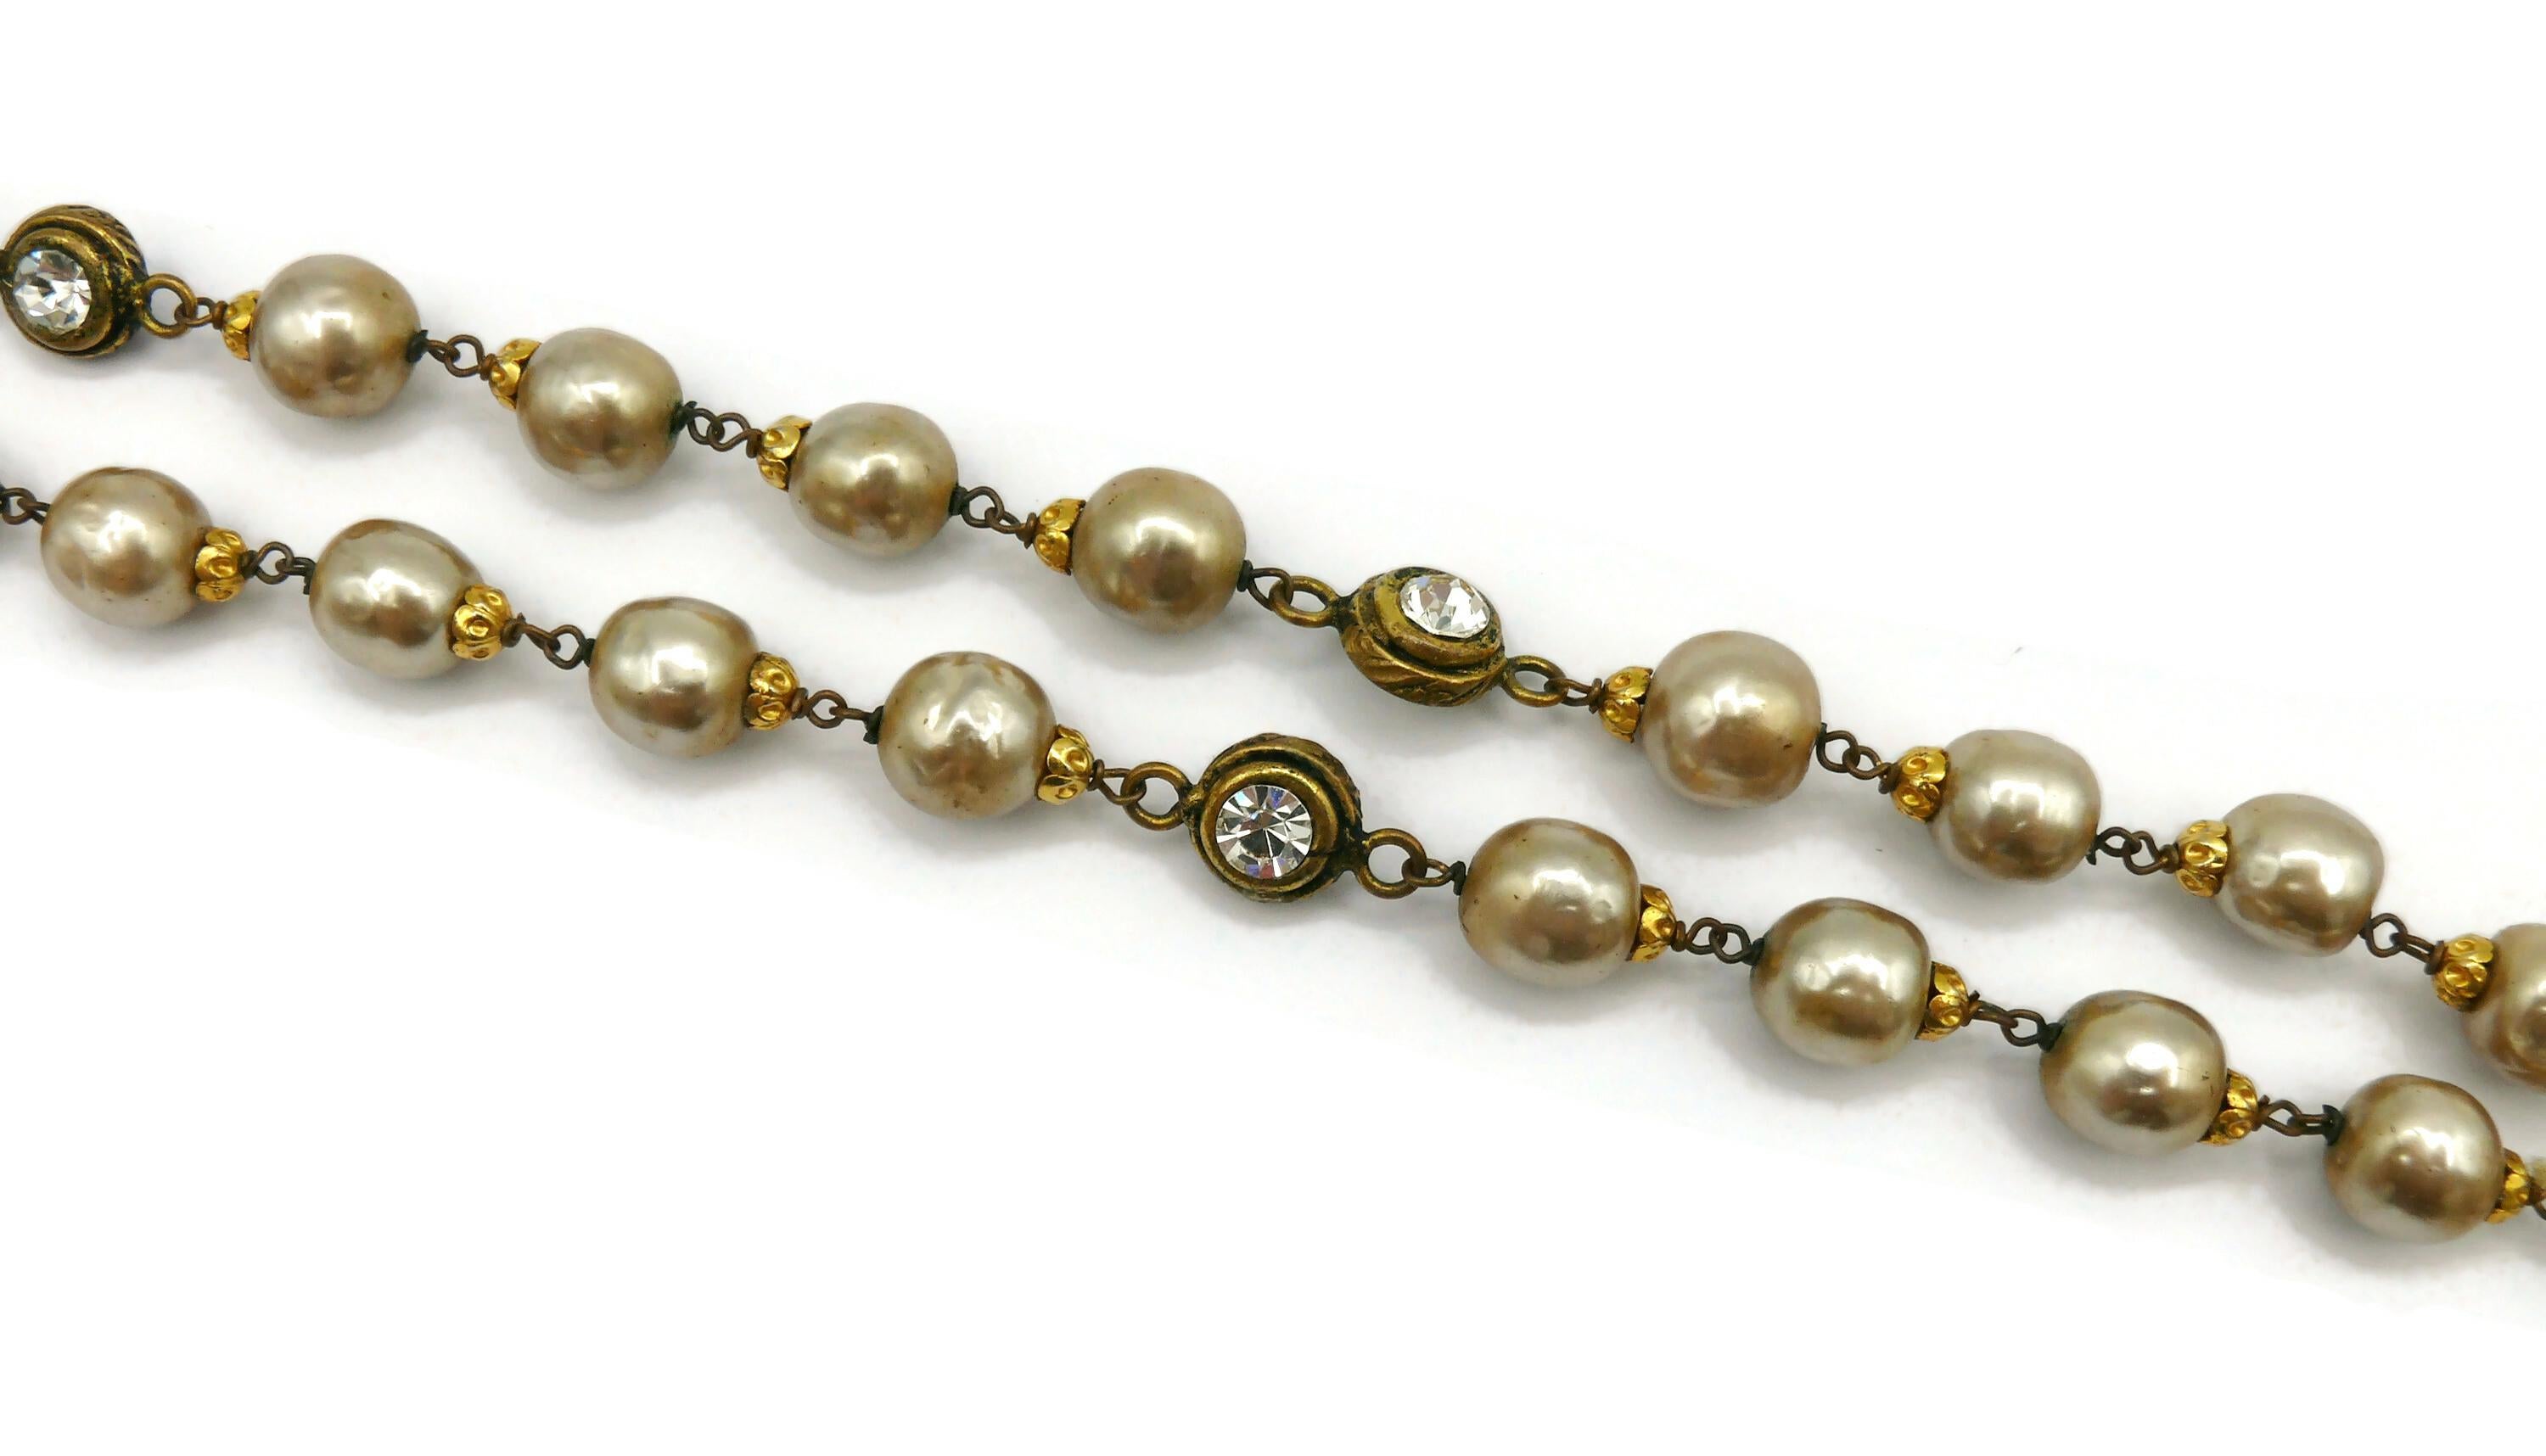 CHANEL Vintage Pearl & Crystal Sautoir Necklace, 1983 For Sale 6